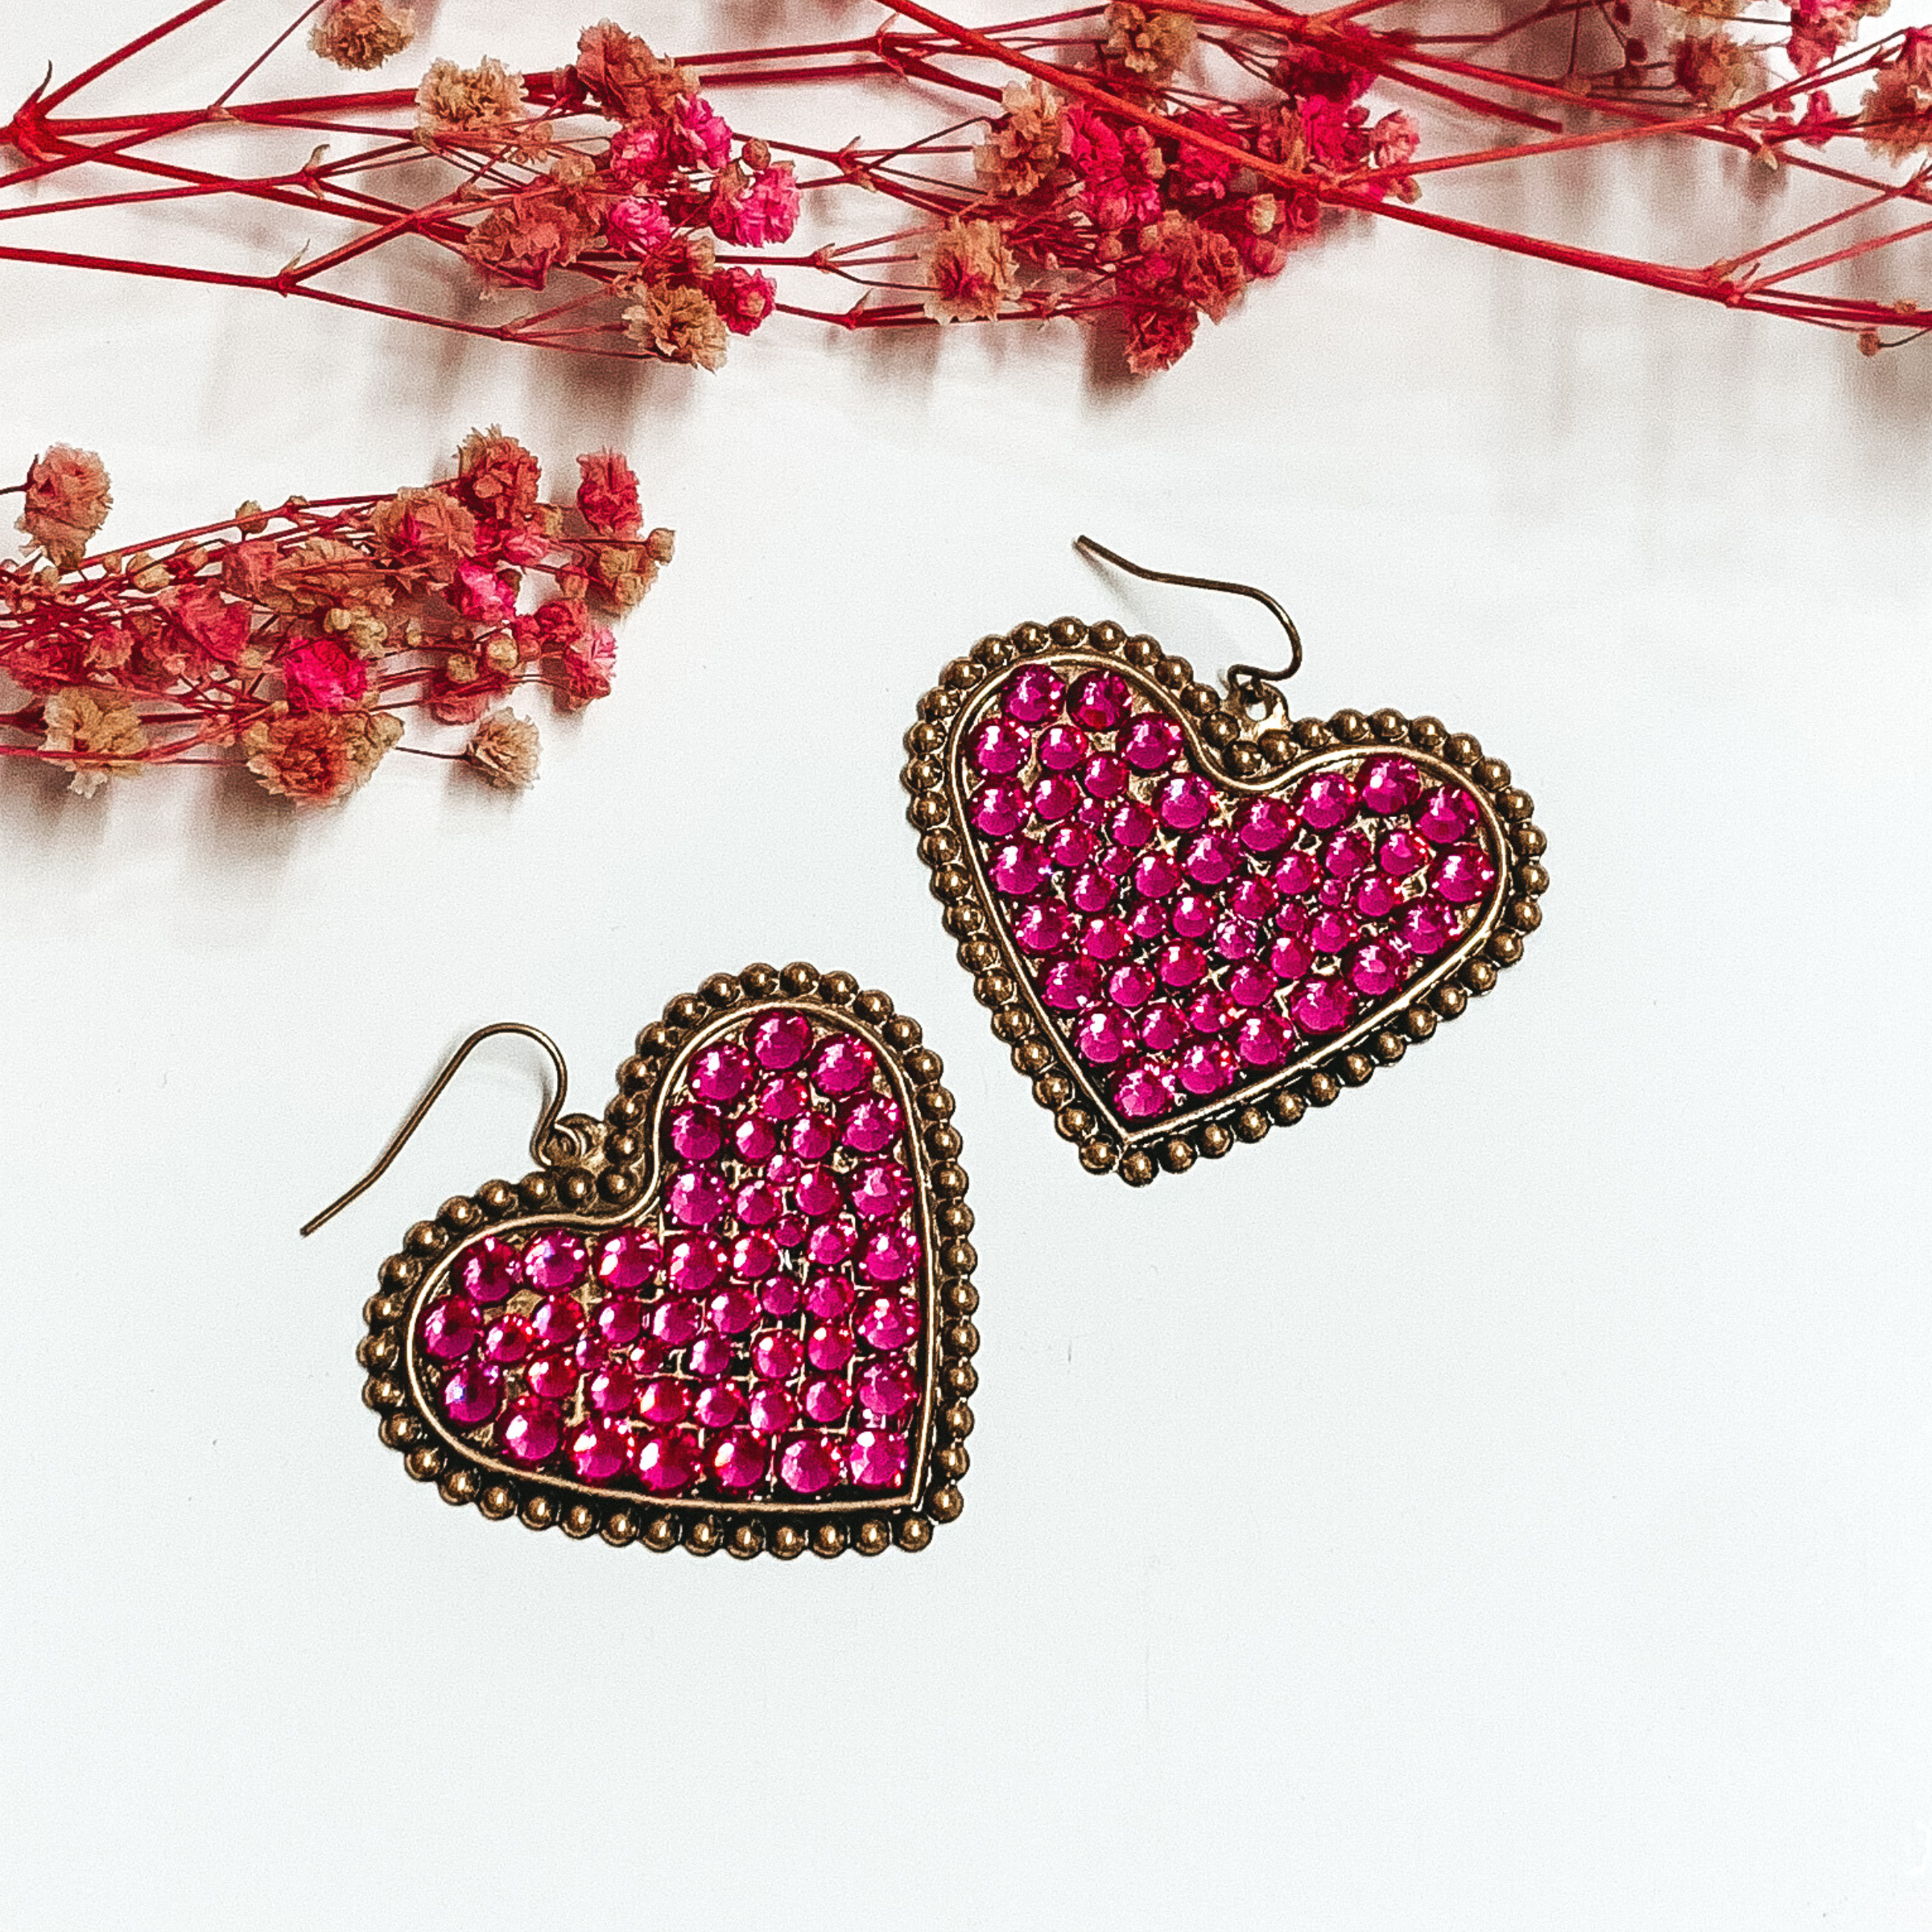 Bronze heart dangle earrings encrusted with fuchsia crystals. These earrings are pictured on a white background with small pink flowers at the top of the picture. 